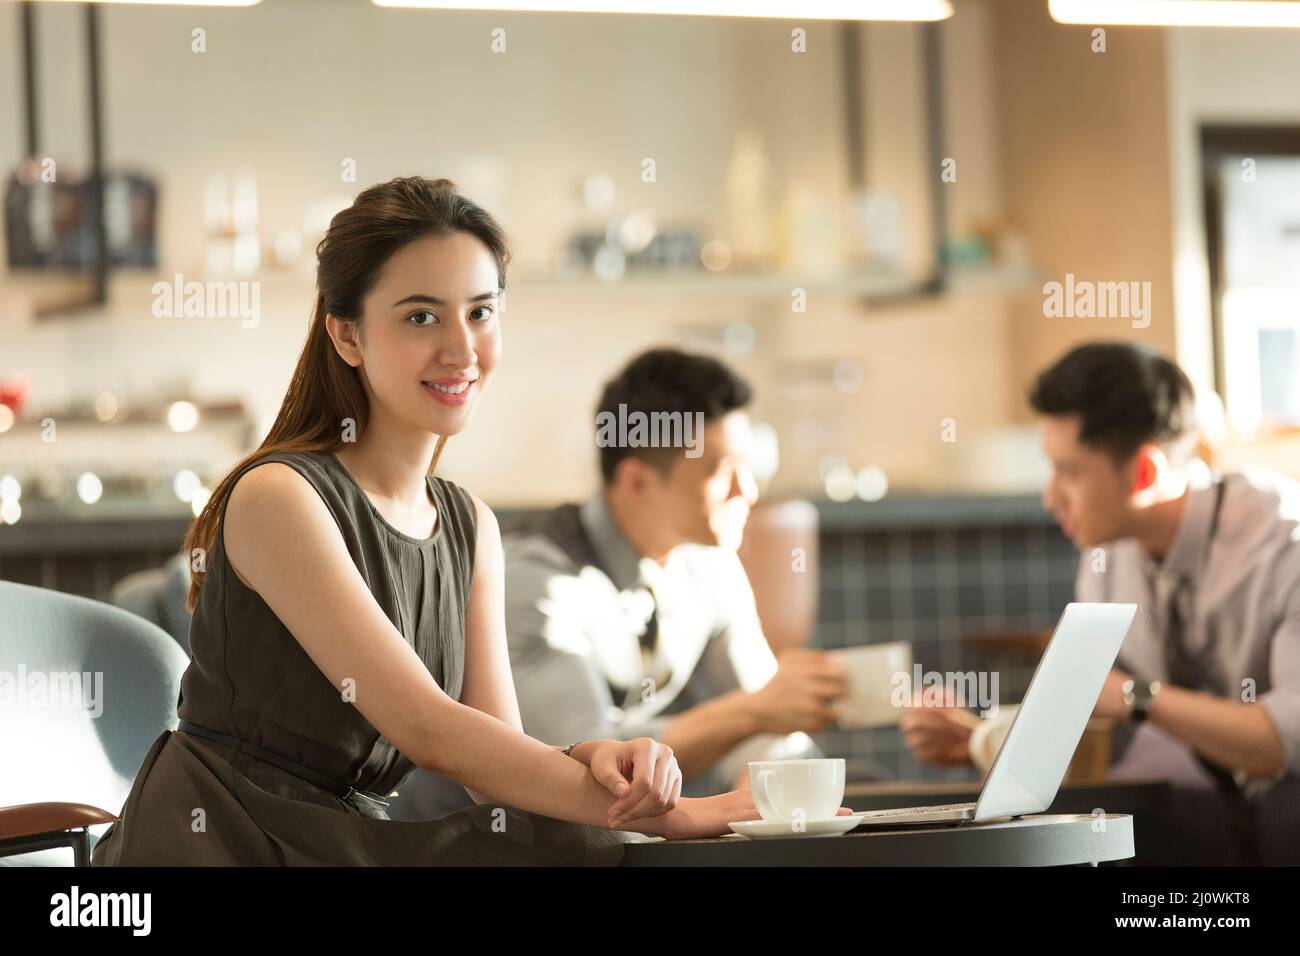 Chinese woman work in cafe Stock Photo